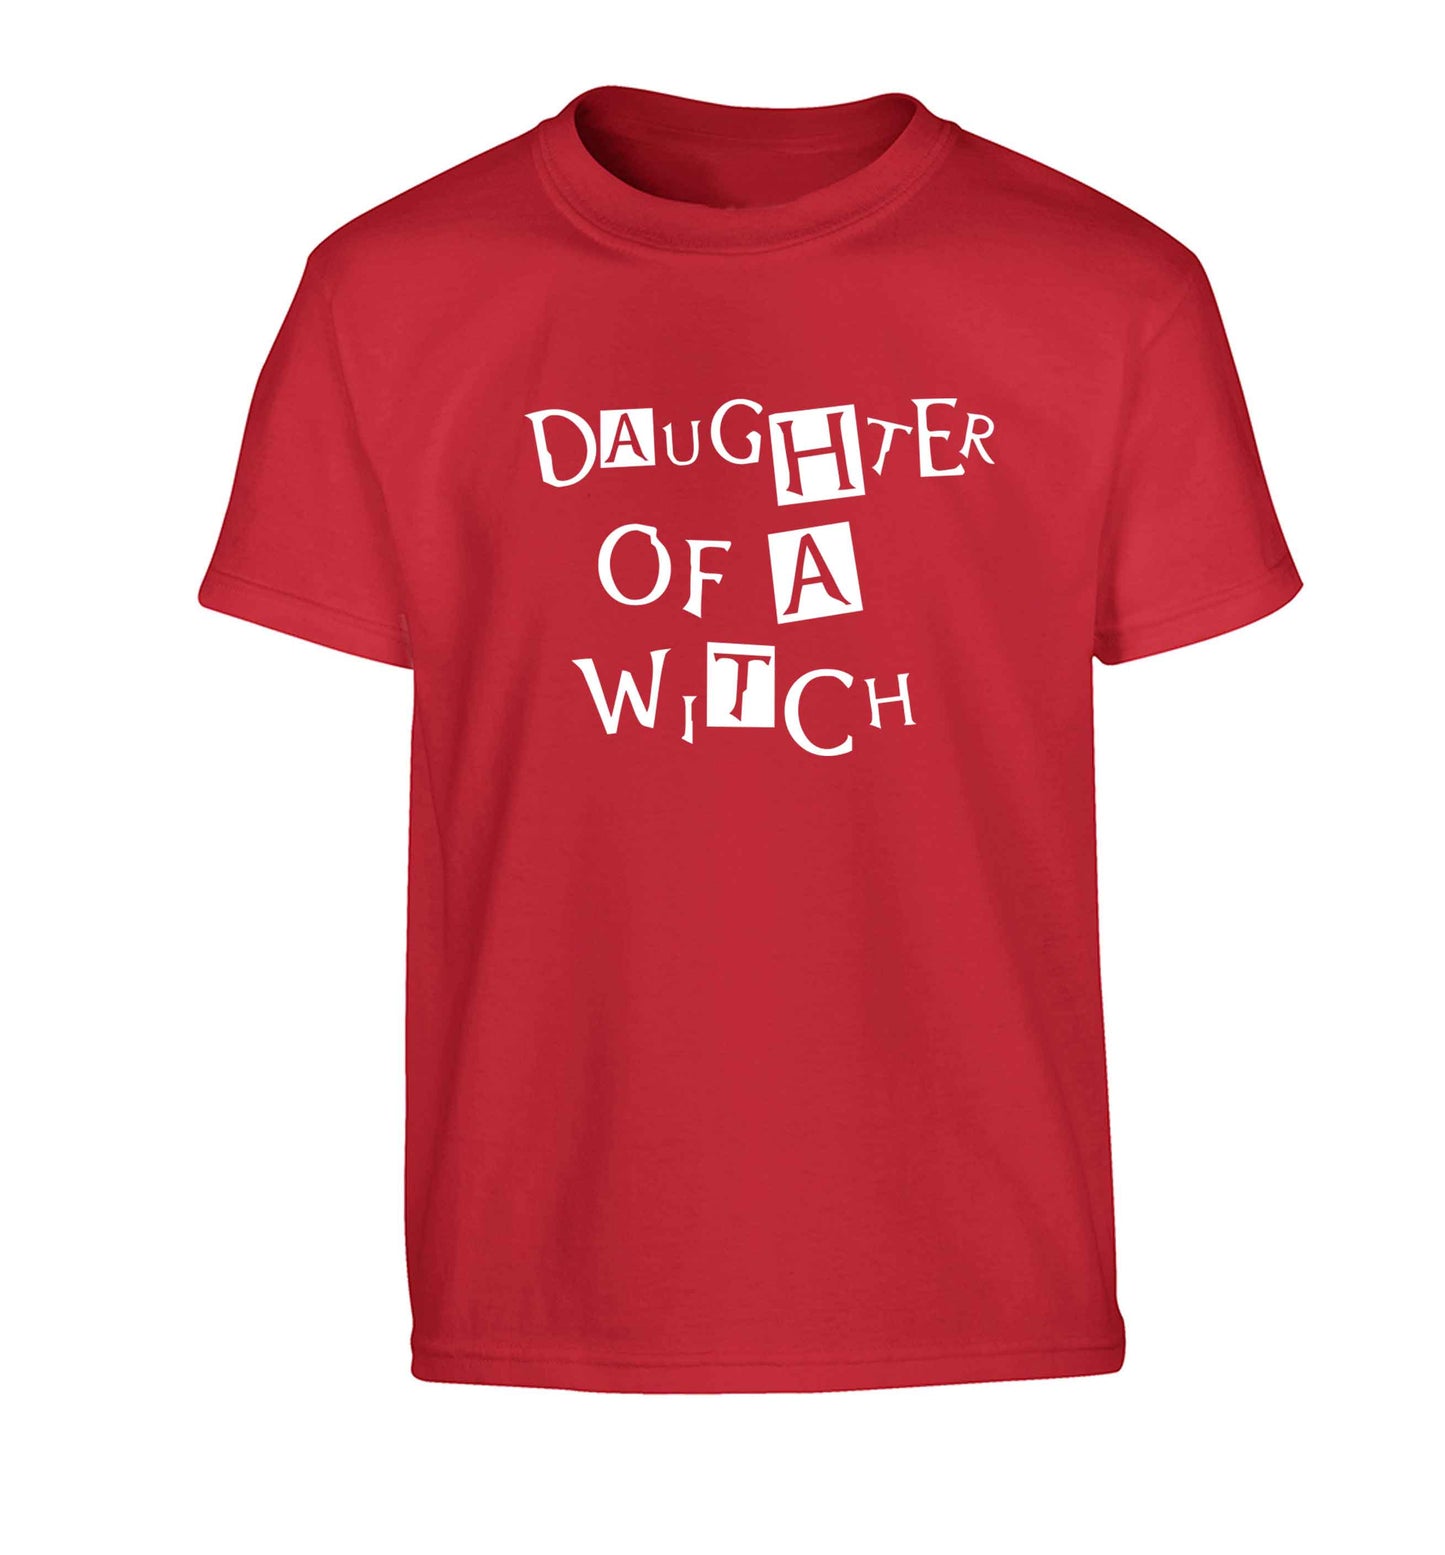 Daughter of a witch Children's red Tshirt 12-13 Years